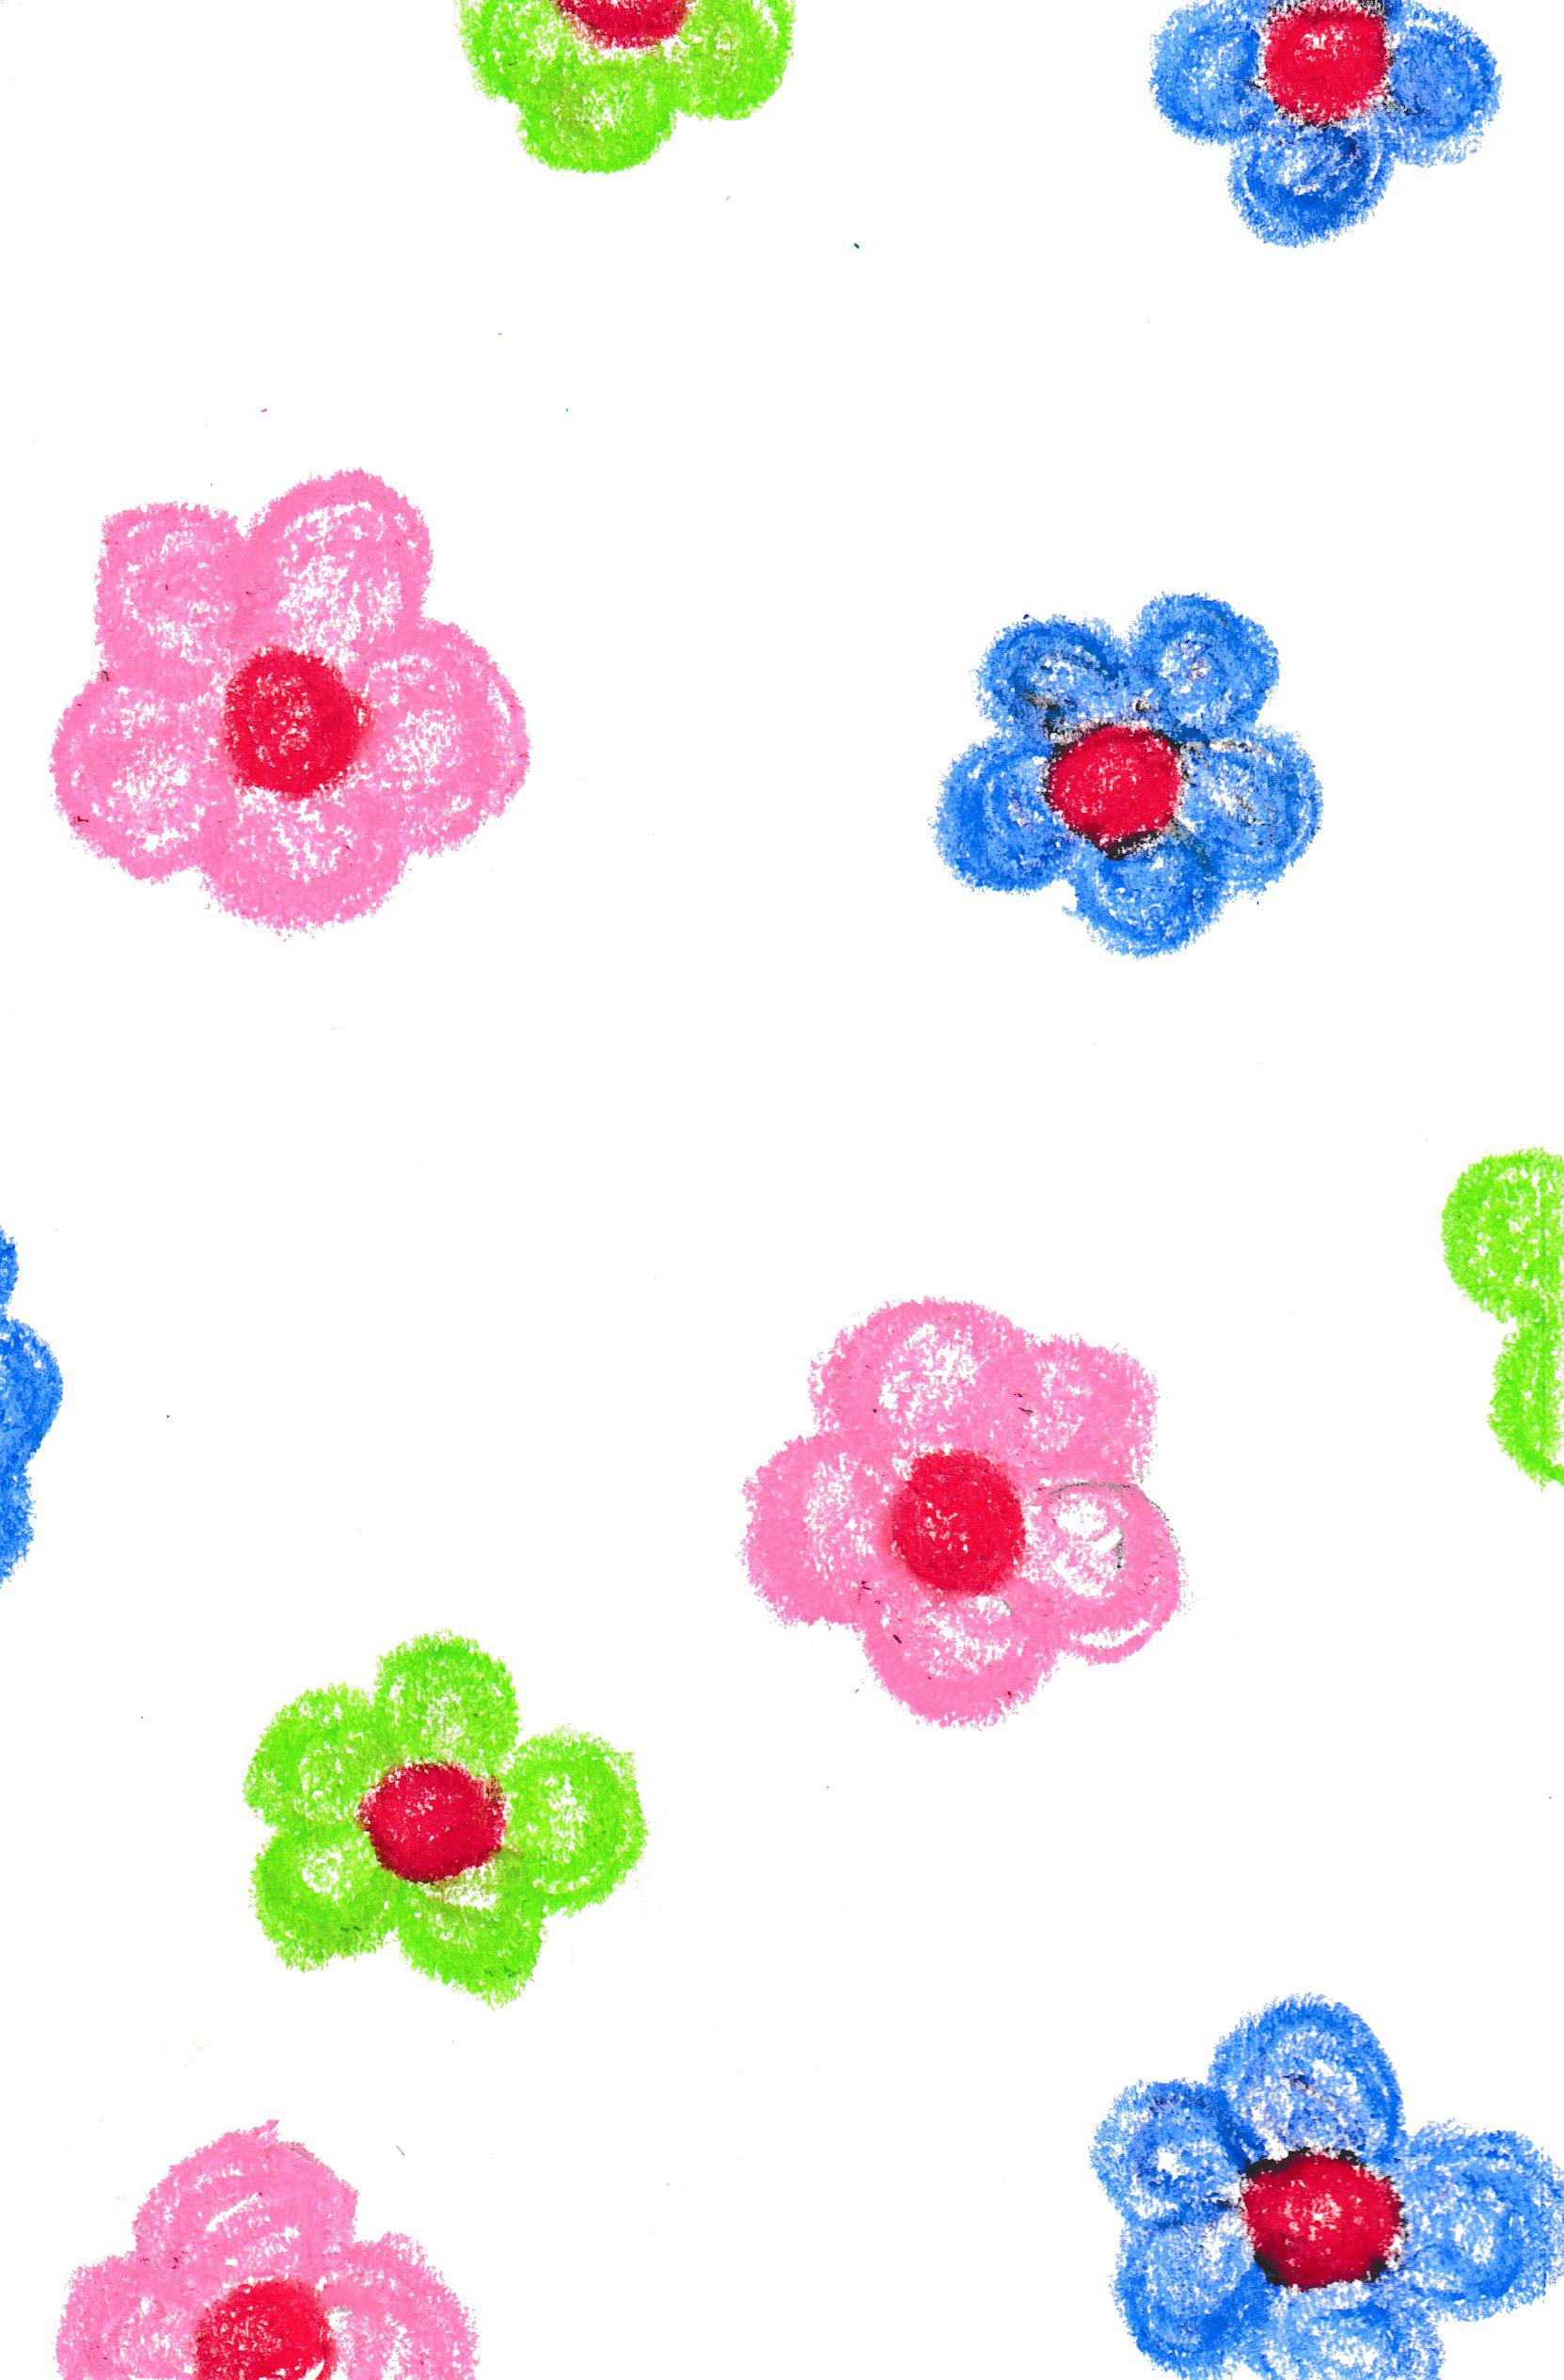 Lime green, dark blue, and baby pink hand drawn flowers with red centers scattered across a white background.